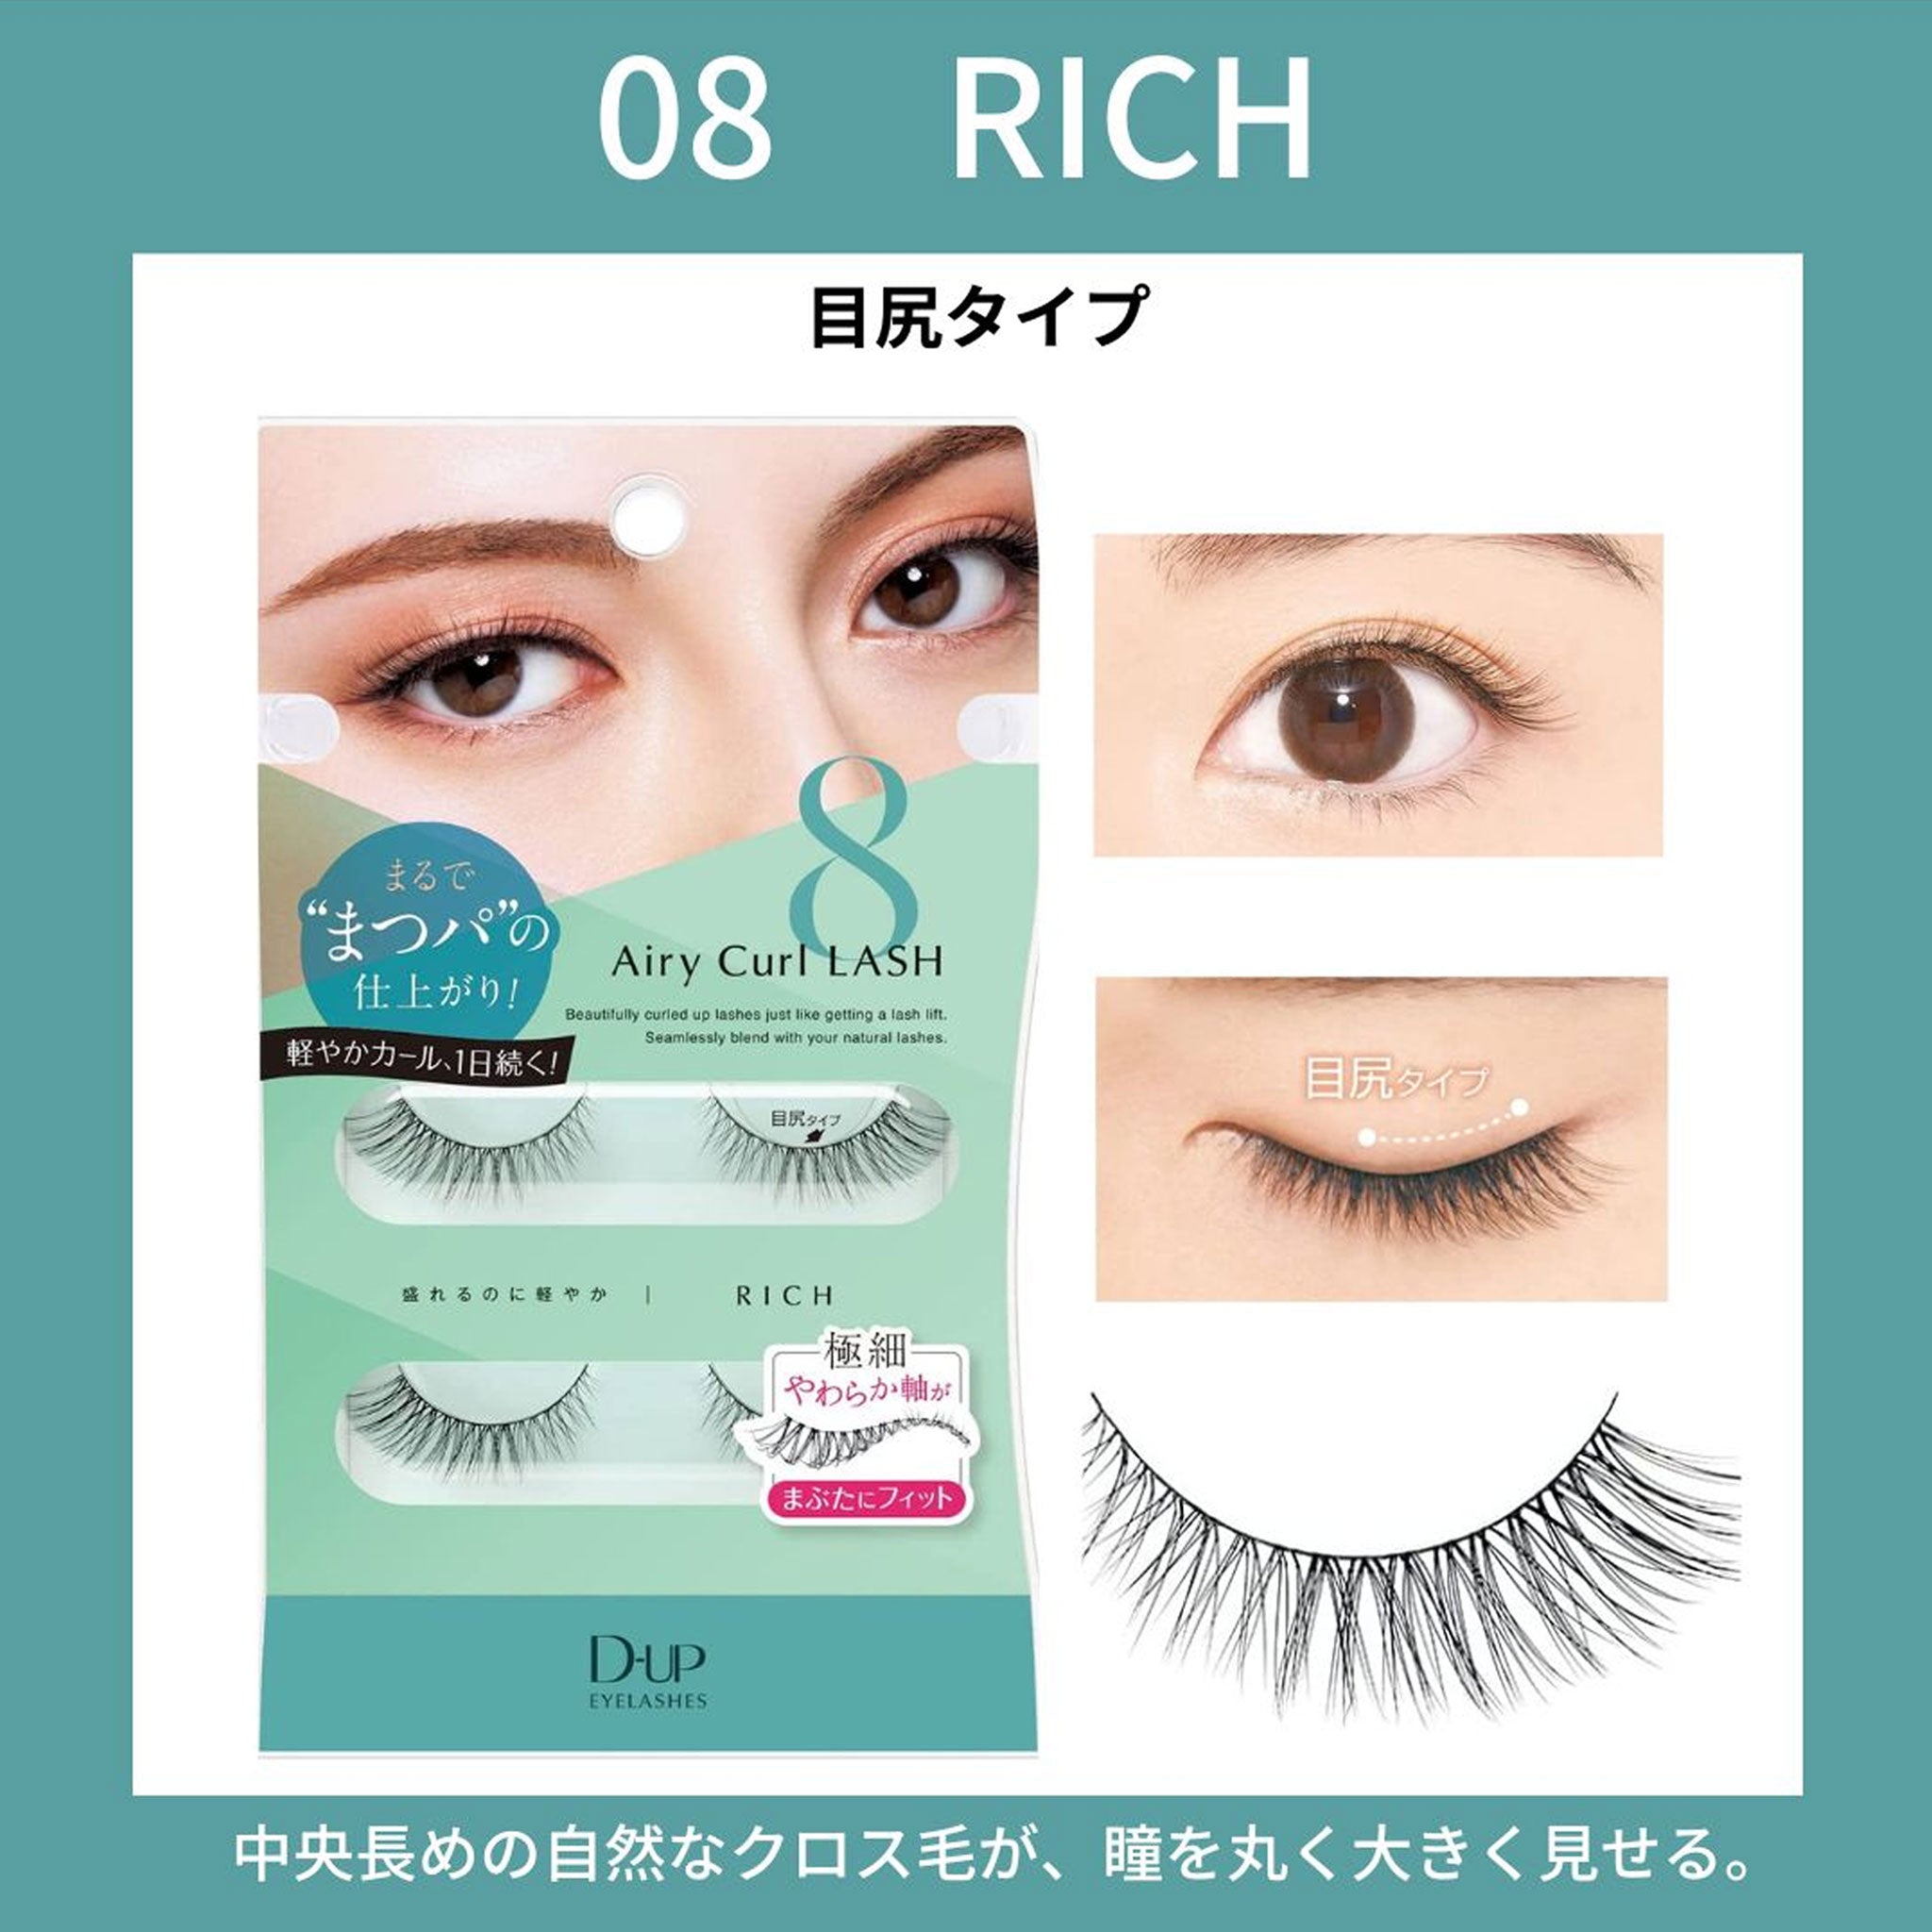 D.UP Eyelashes Airy Curl Lash